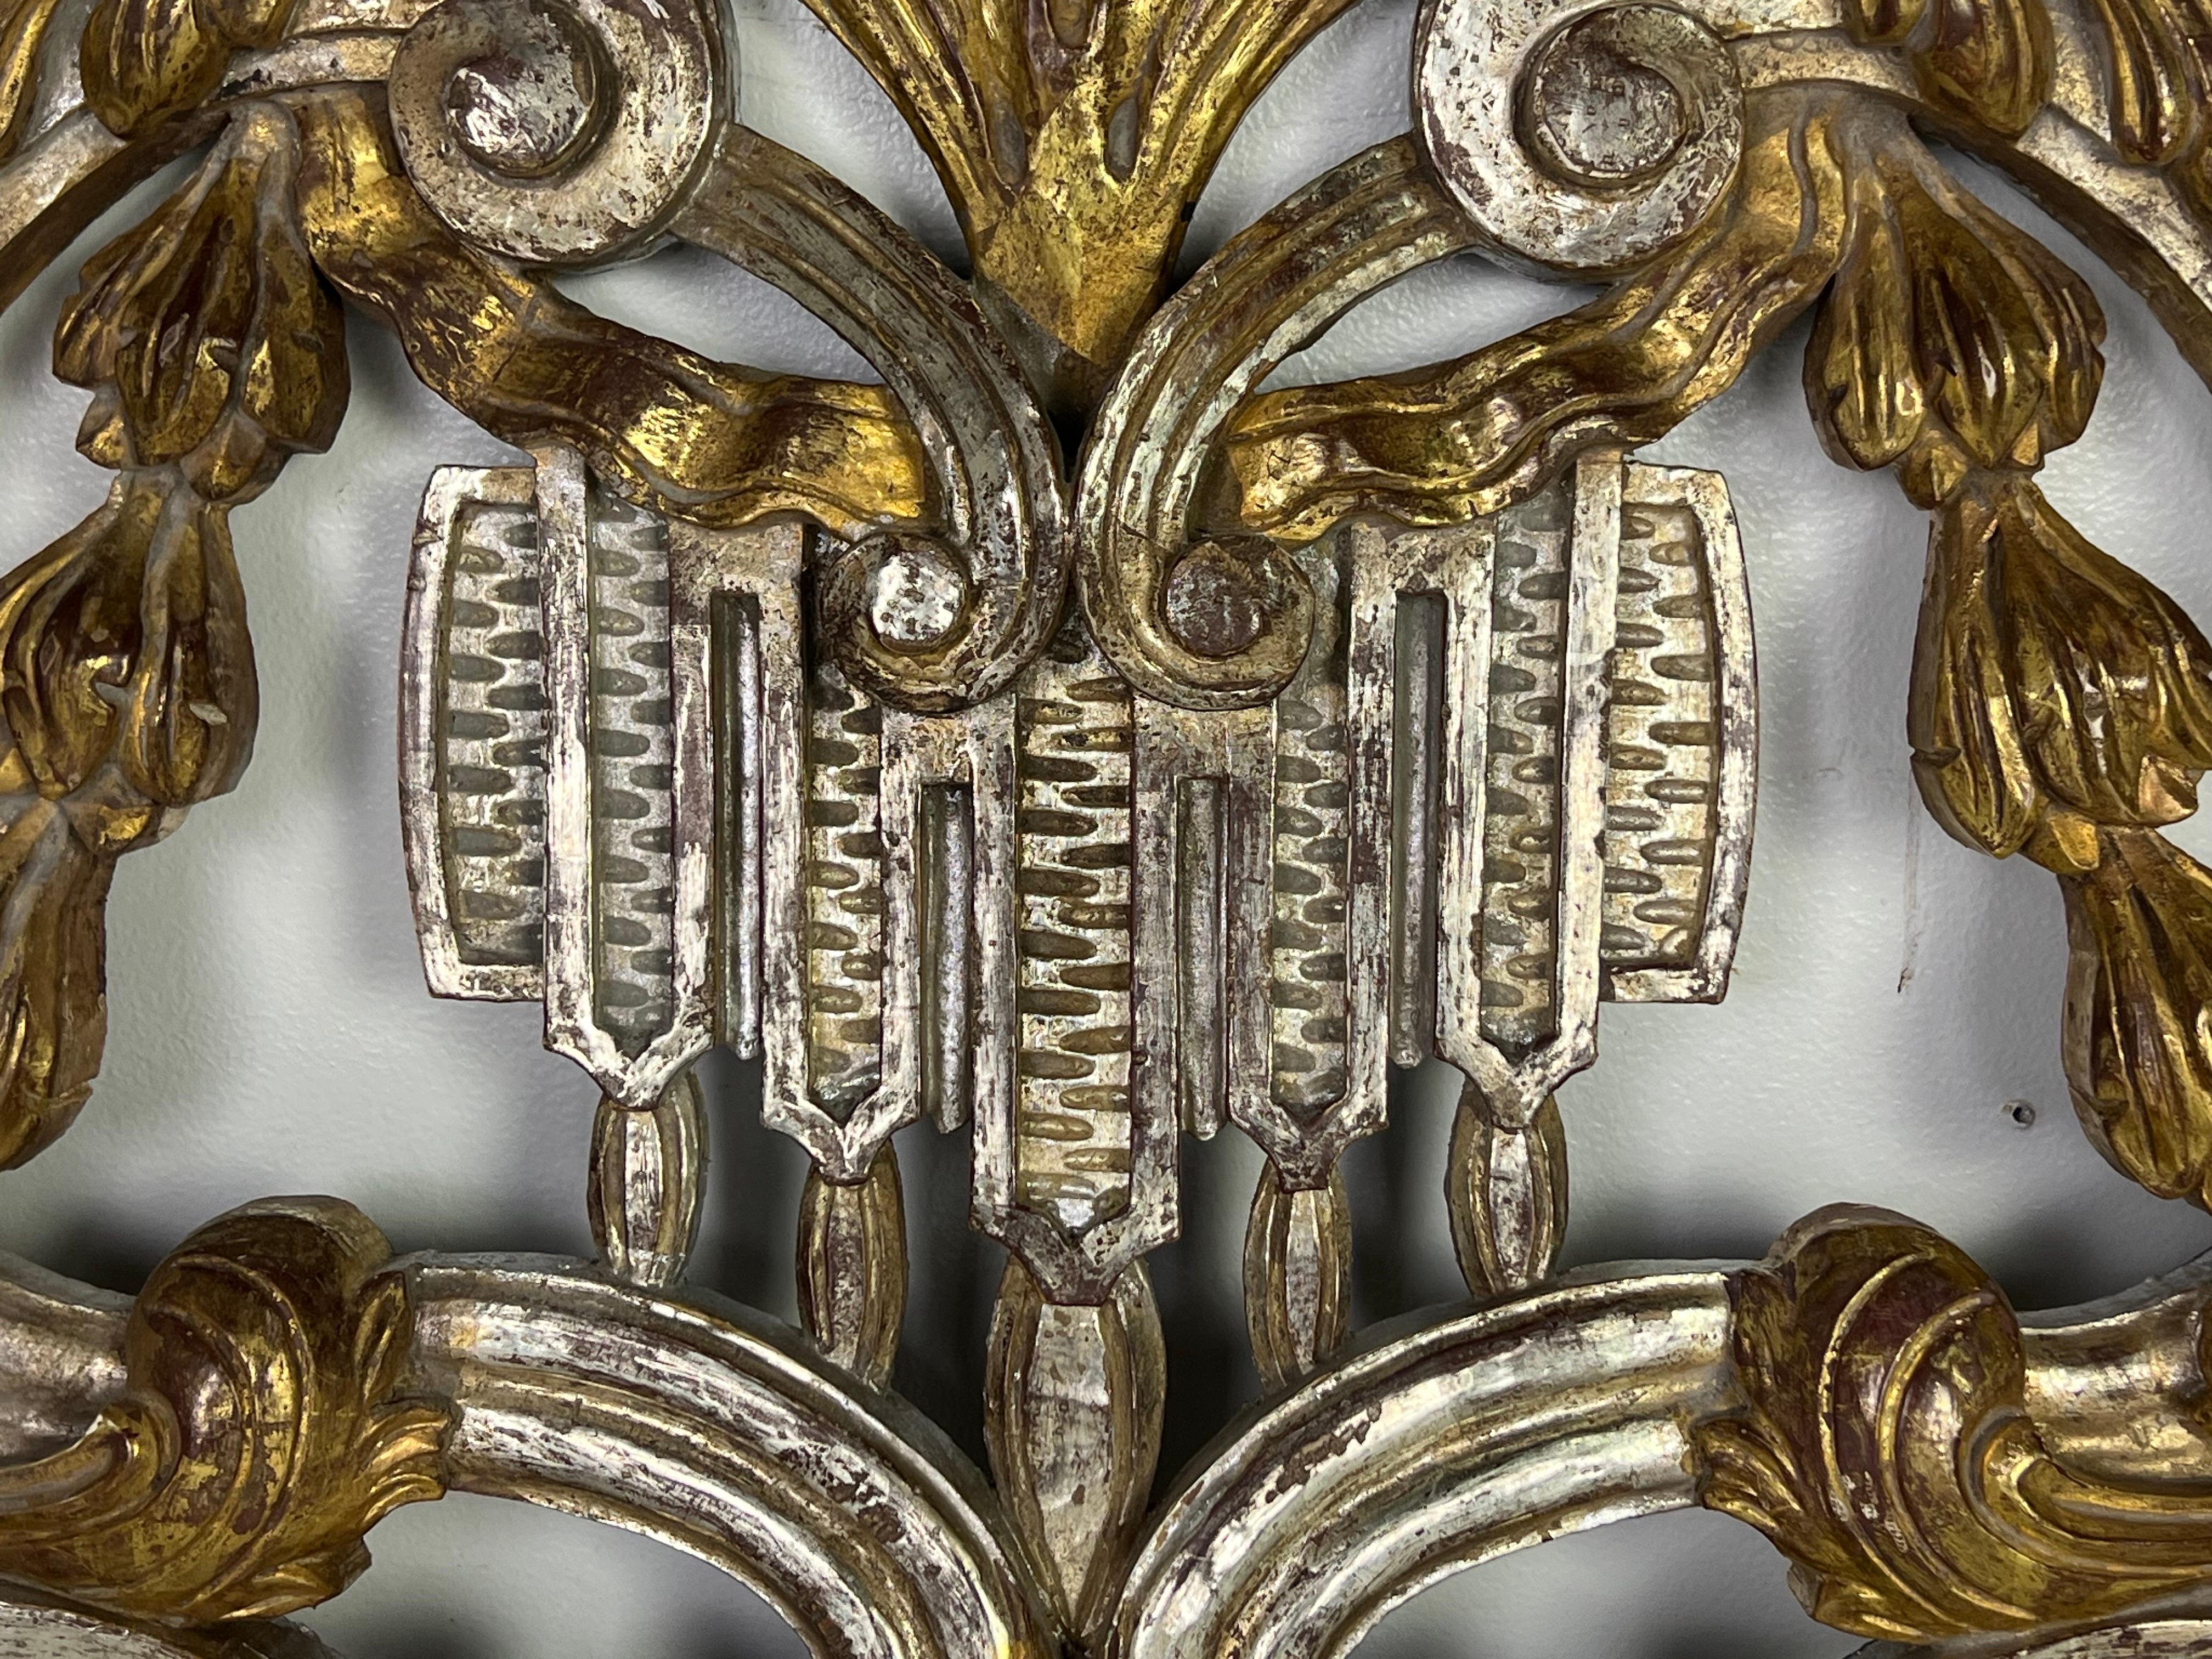 Early 20th Century Silver and Gold Giltwood Carving w/ Scrolls and Acanthus Leaves C. 1900